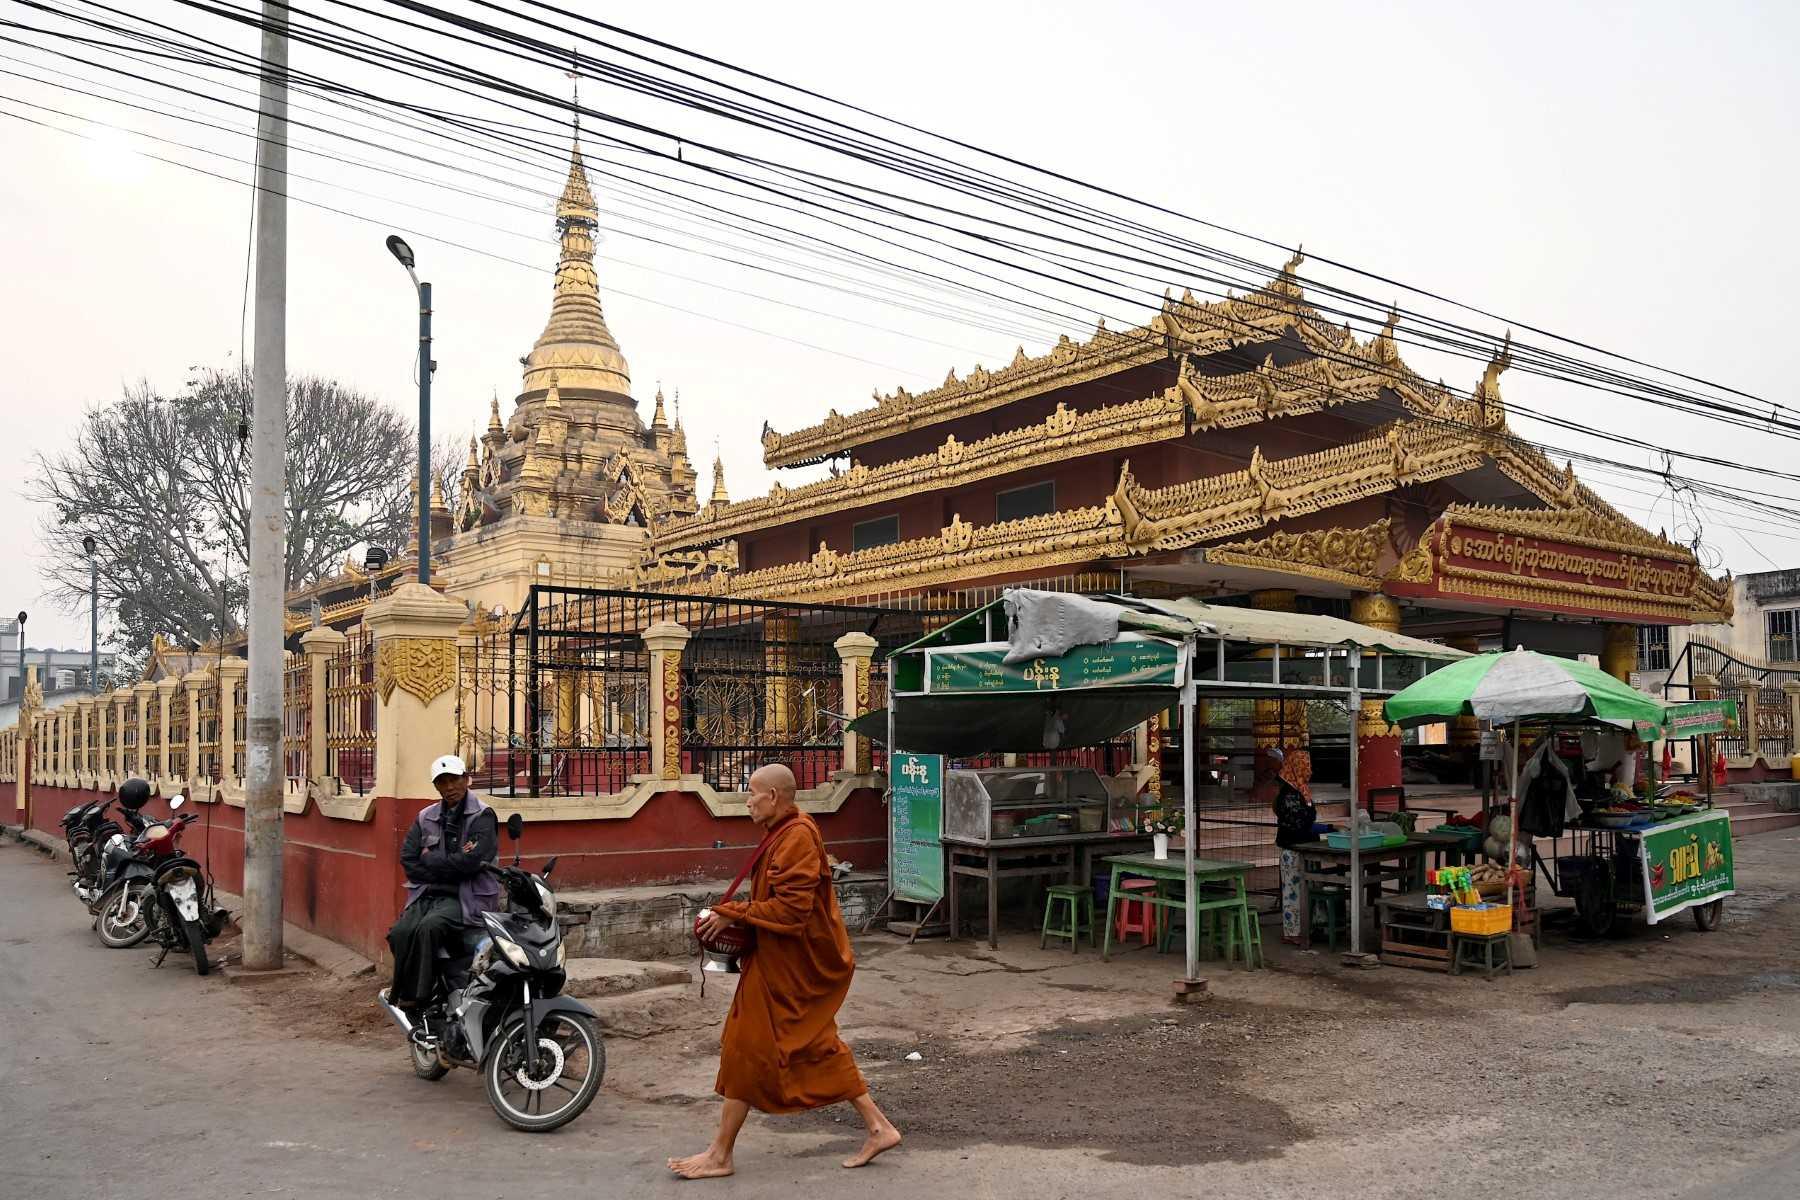 A Buddhist monk walks past a temple in Pyin Oo Lwin Township, Mandalay, on March 11. Photo: AFP